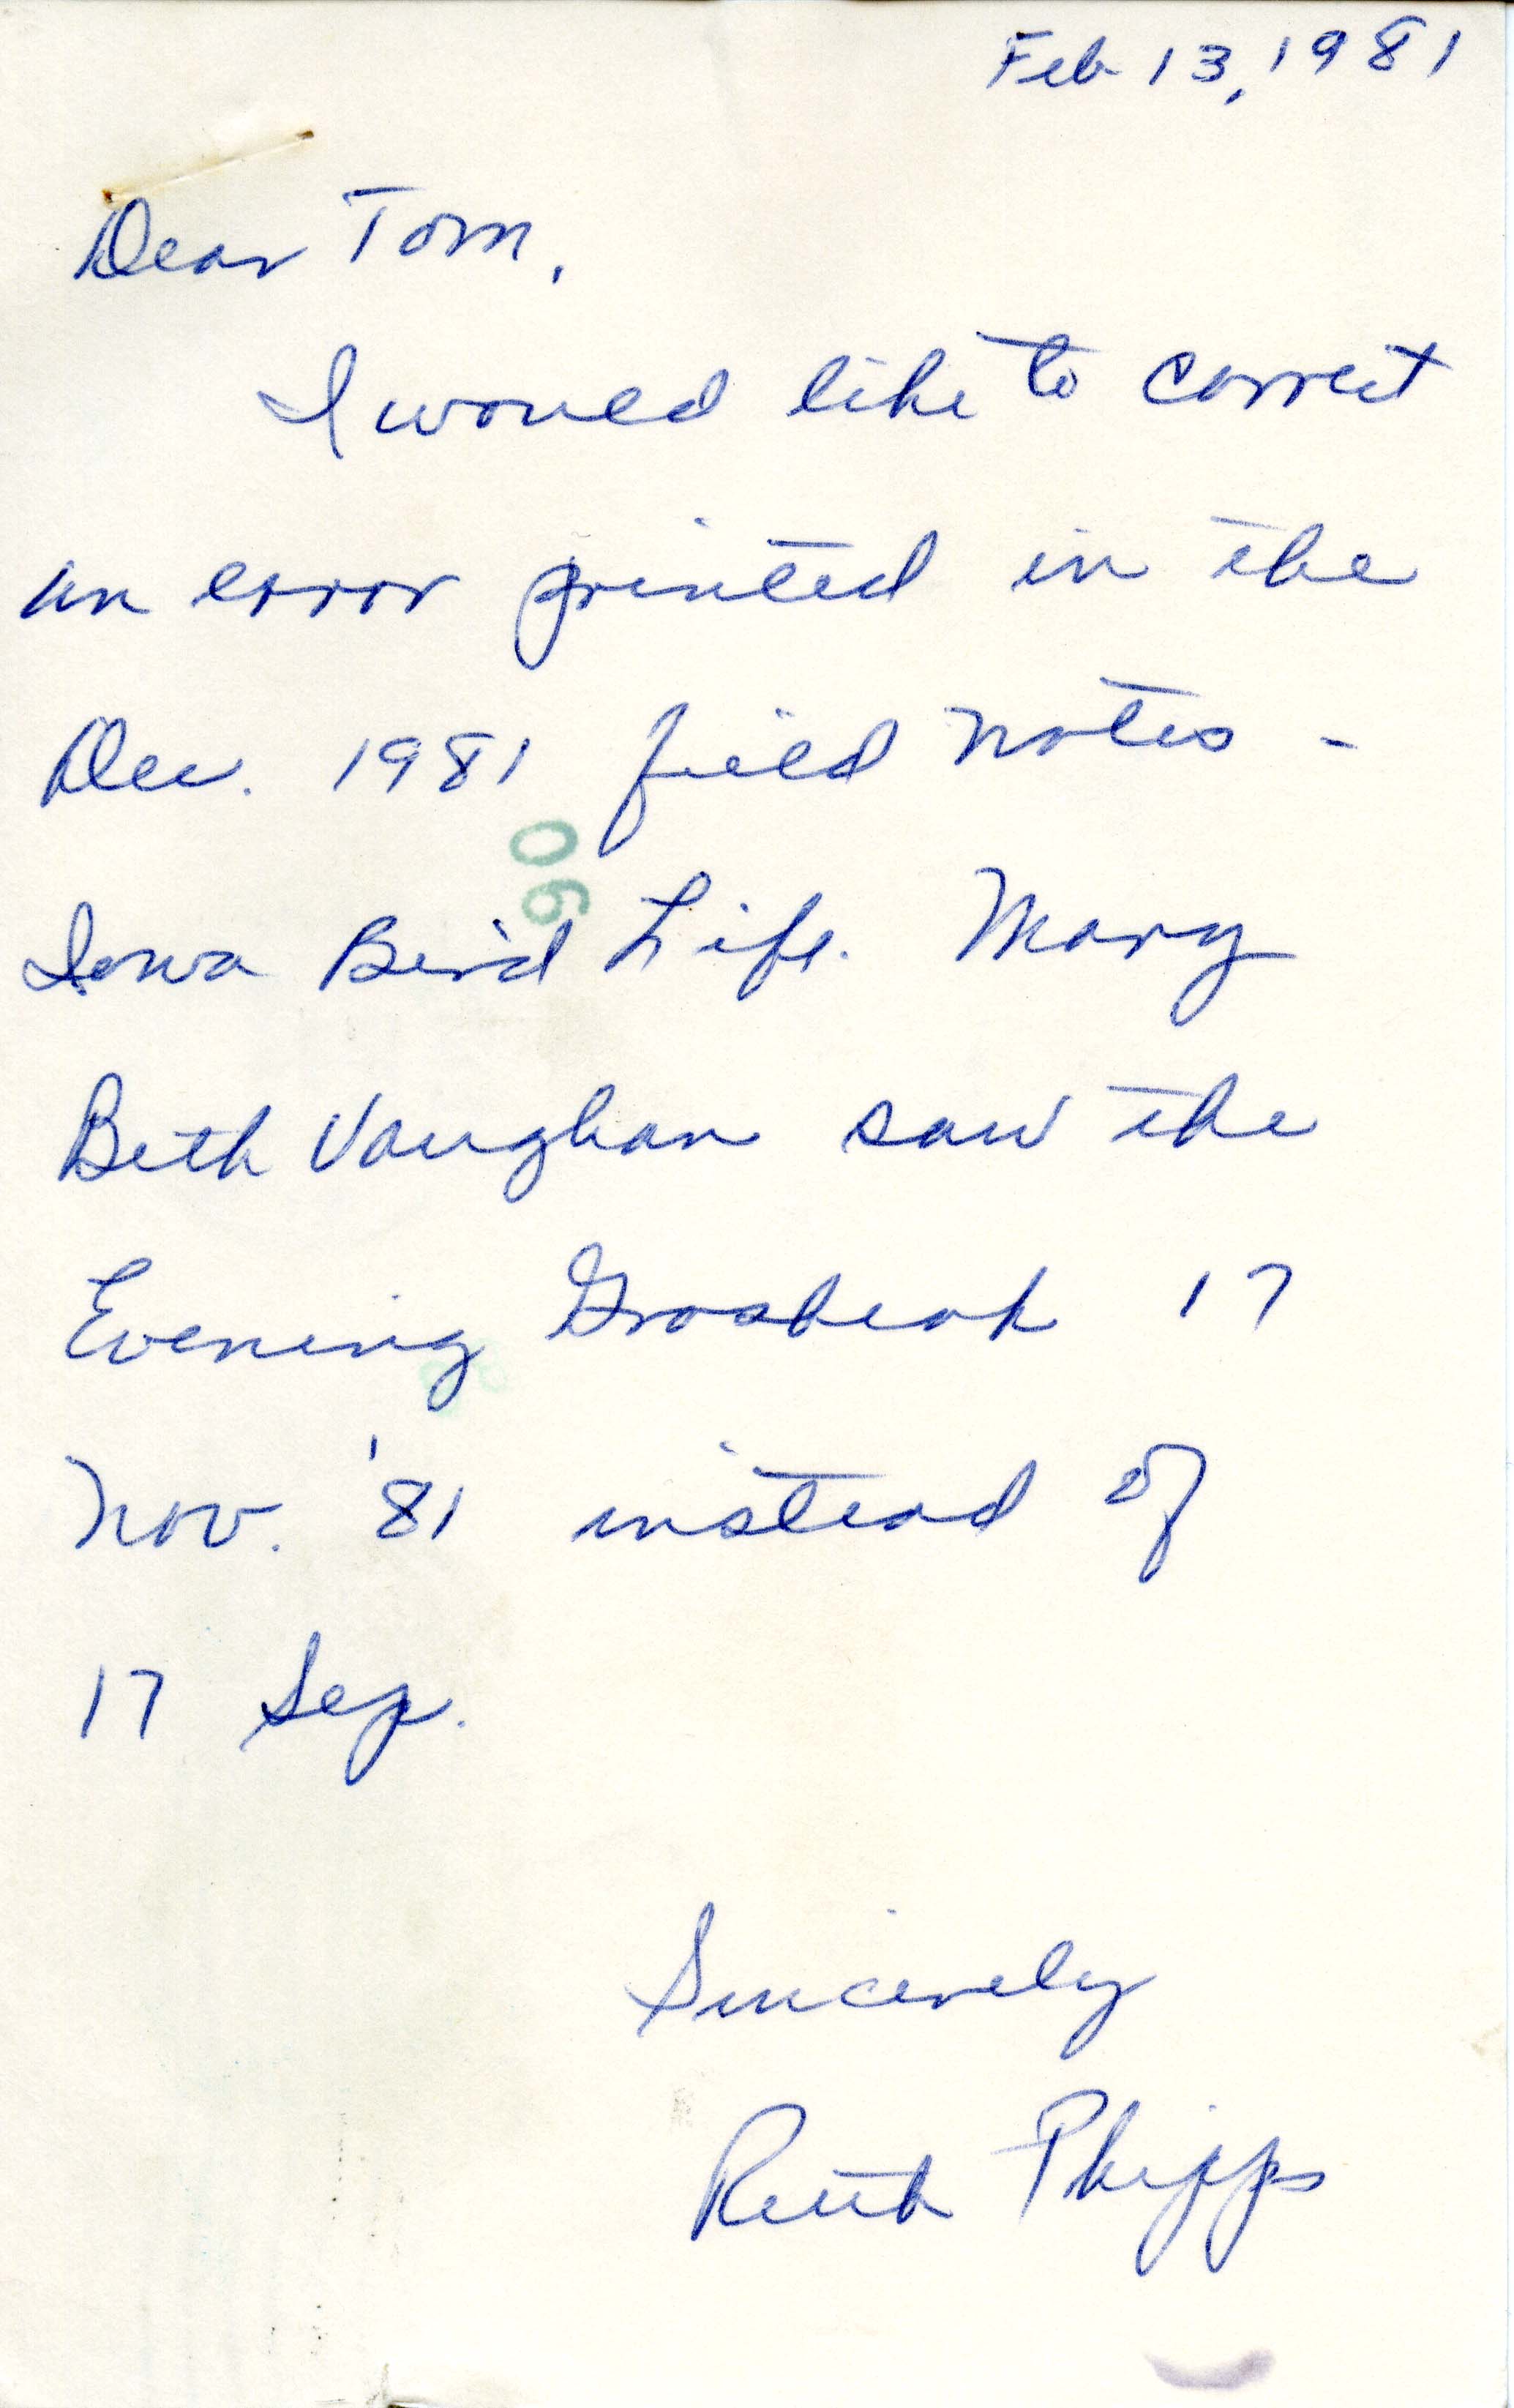 Ruth Phipps post card to Thomas H. Kent regarding field notes, February 13, 1981